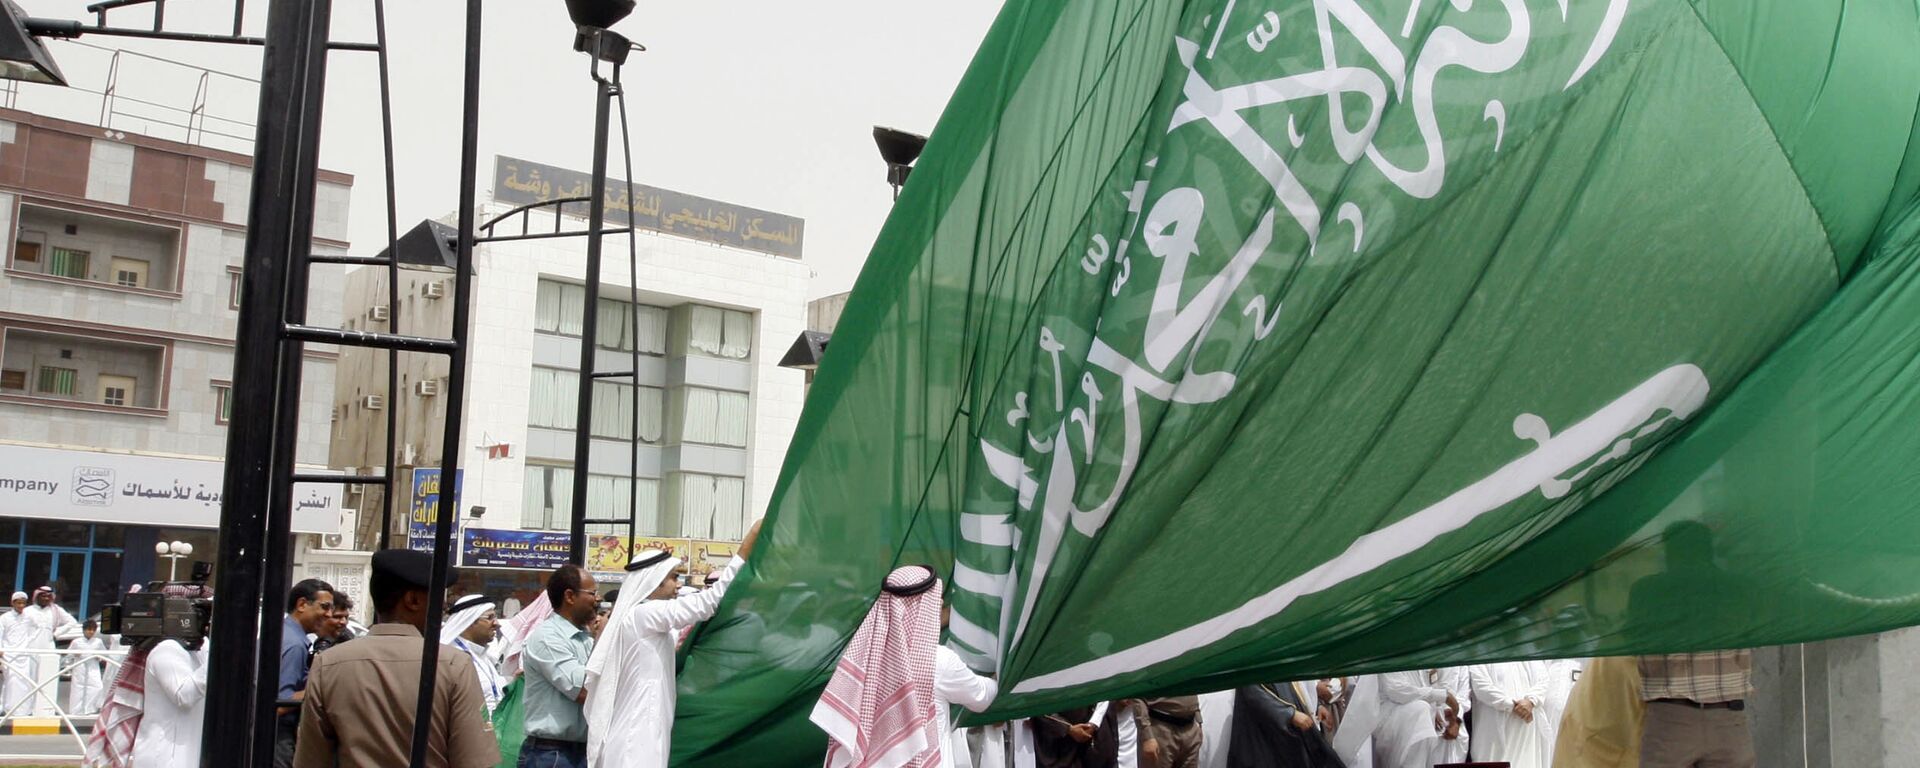 Saudi men unfurl a giant Saudi national flag during a ceremony to raise the highest flag in the country in the eastern city of Dammam on June 17, 2008 - Sputnik International, 1920, 17.01.2022